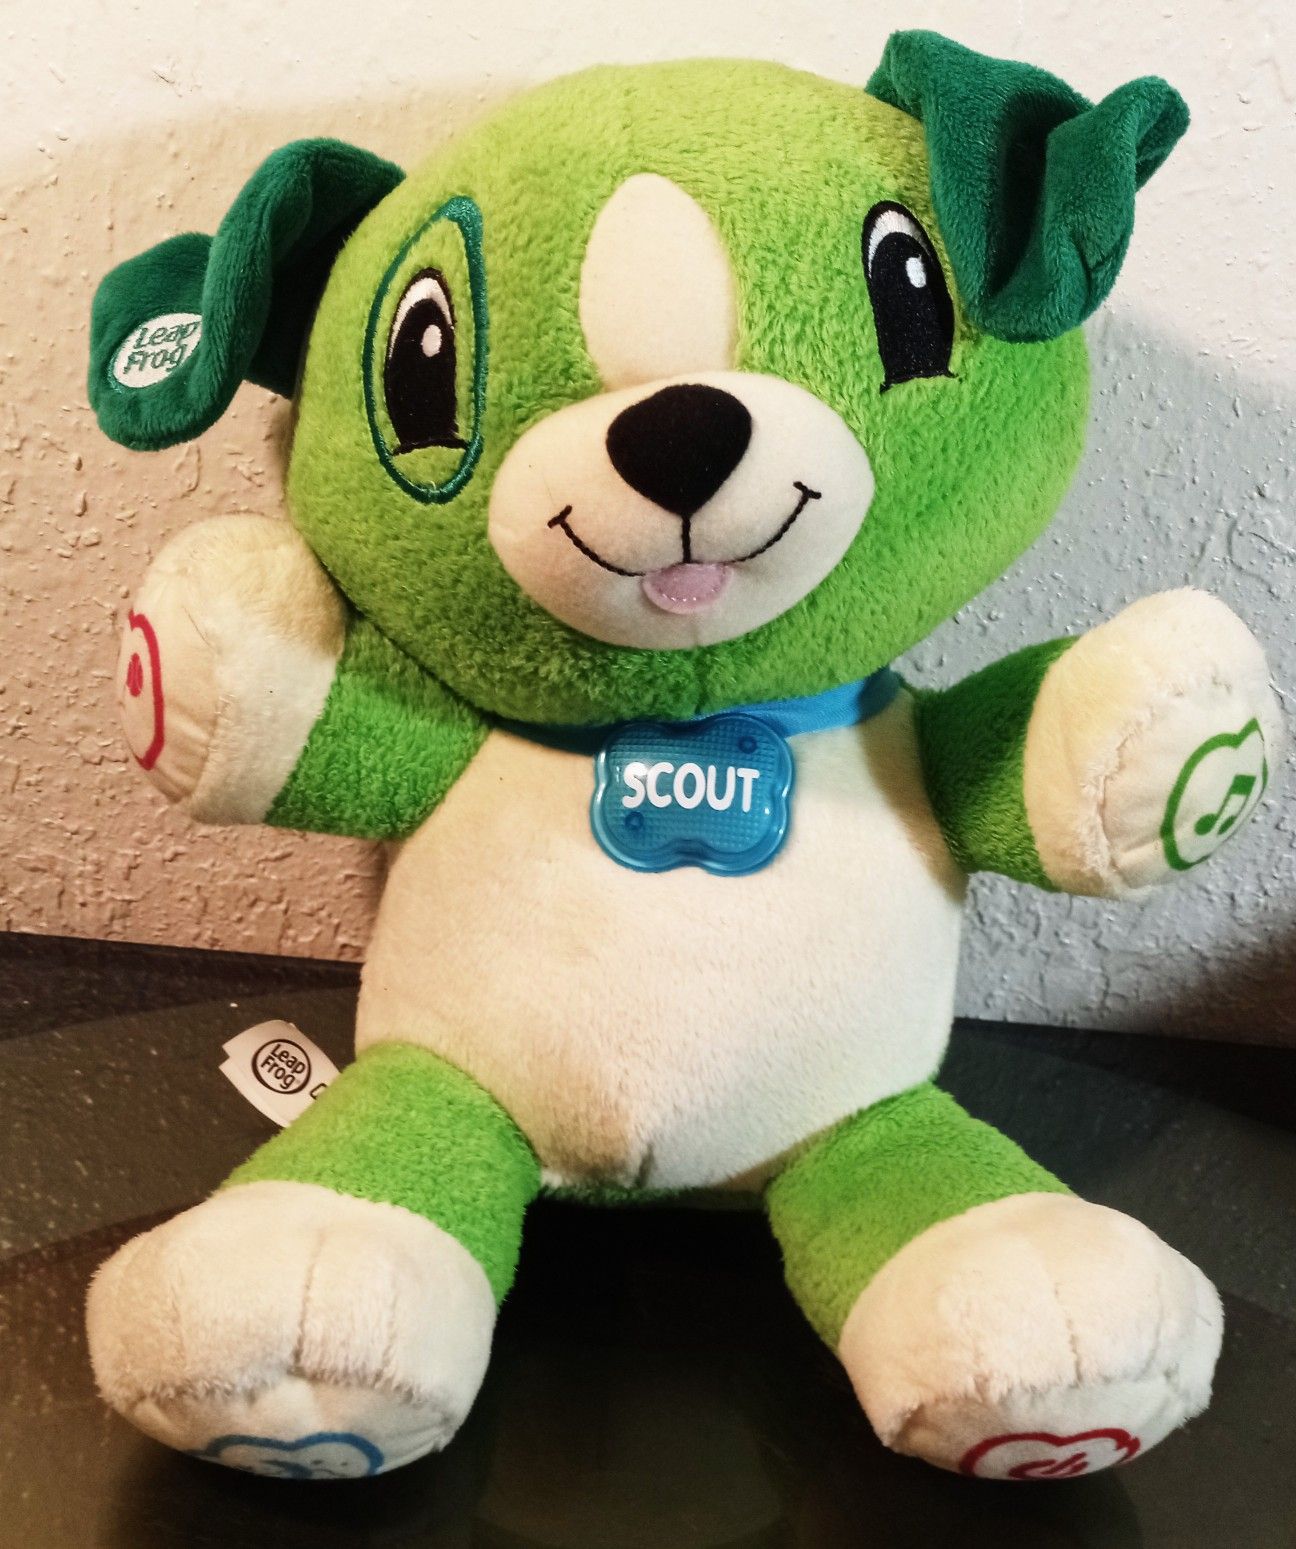 Leapfrog My Pal Scout learning plush